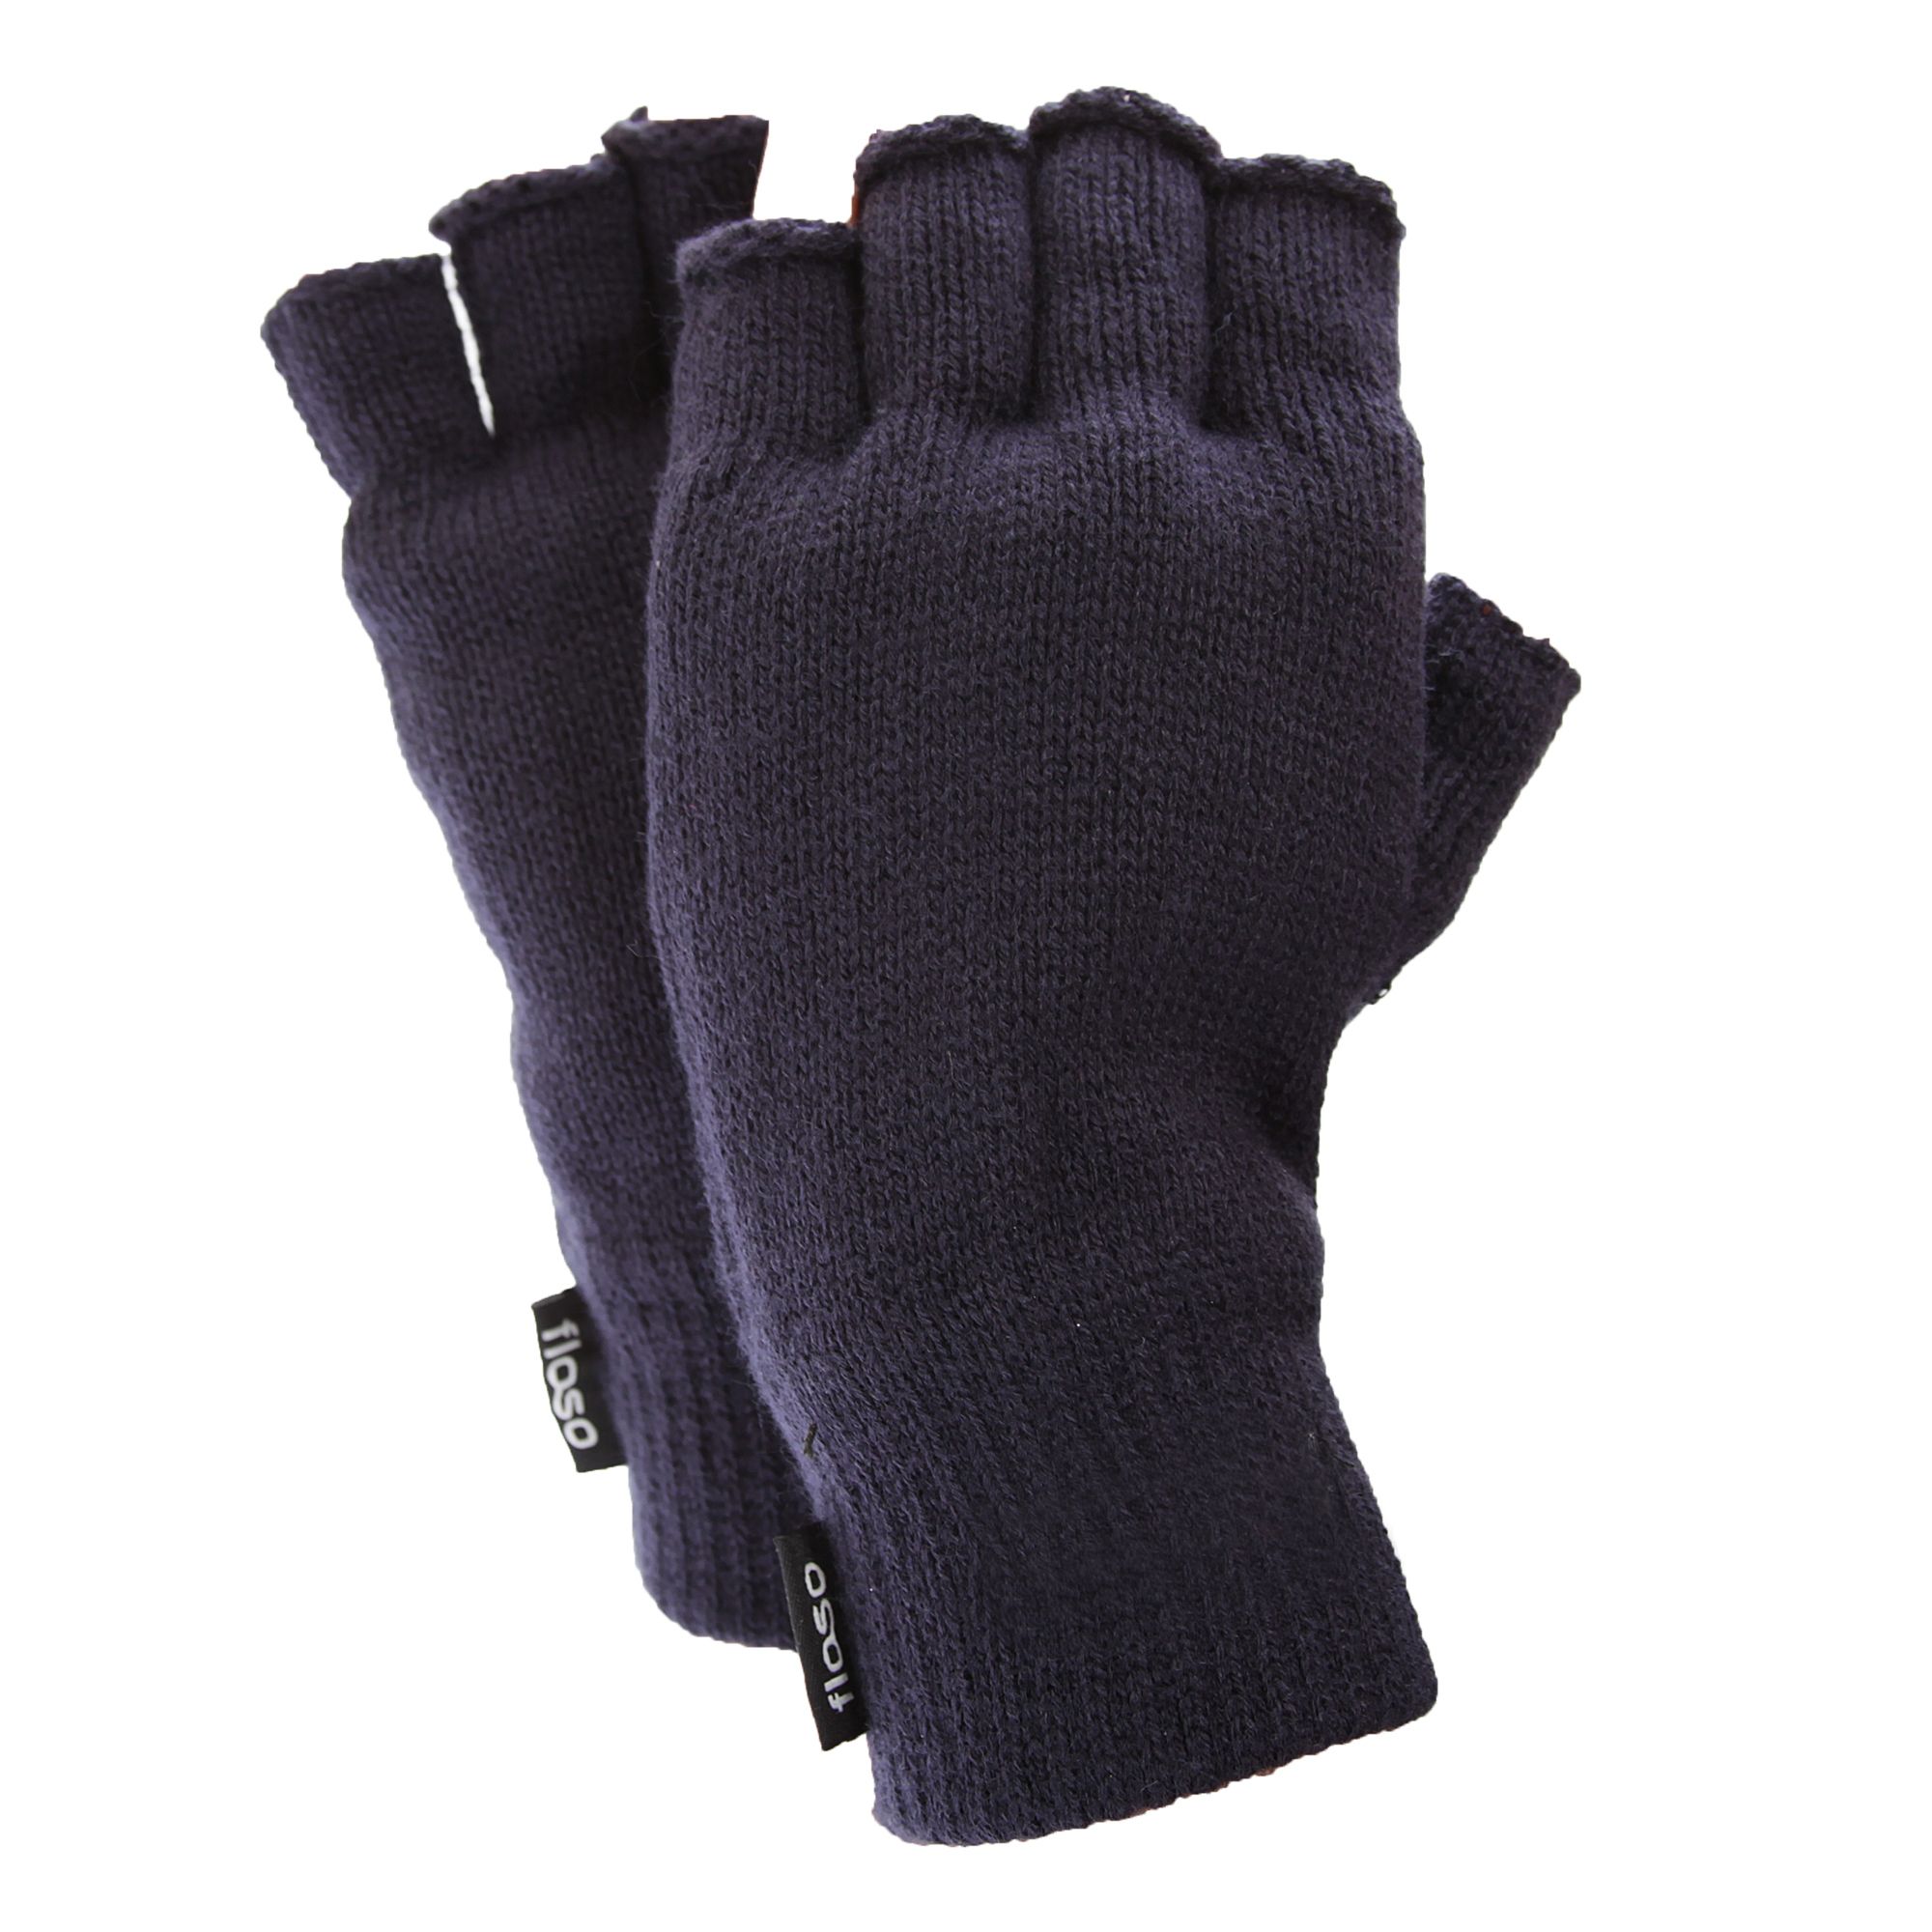 Our mens Thinsulate gloves are of the finest quality. The Thinsulate lining in the gloves provides warmth and additional comfort. Thinsulate gloves provide thermal warmth, are light in weight and comfortable so you can wear them throughout the day. Fibre contents for outer 100% acrylic  and inner 65% Polypropylene, 35% Polyester.